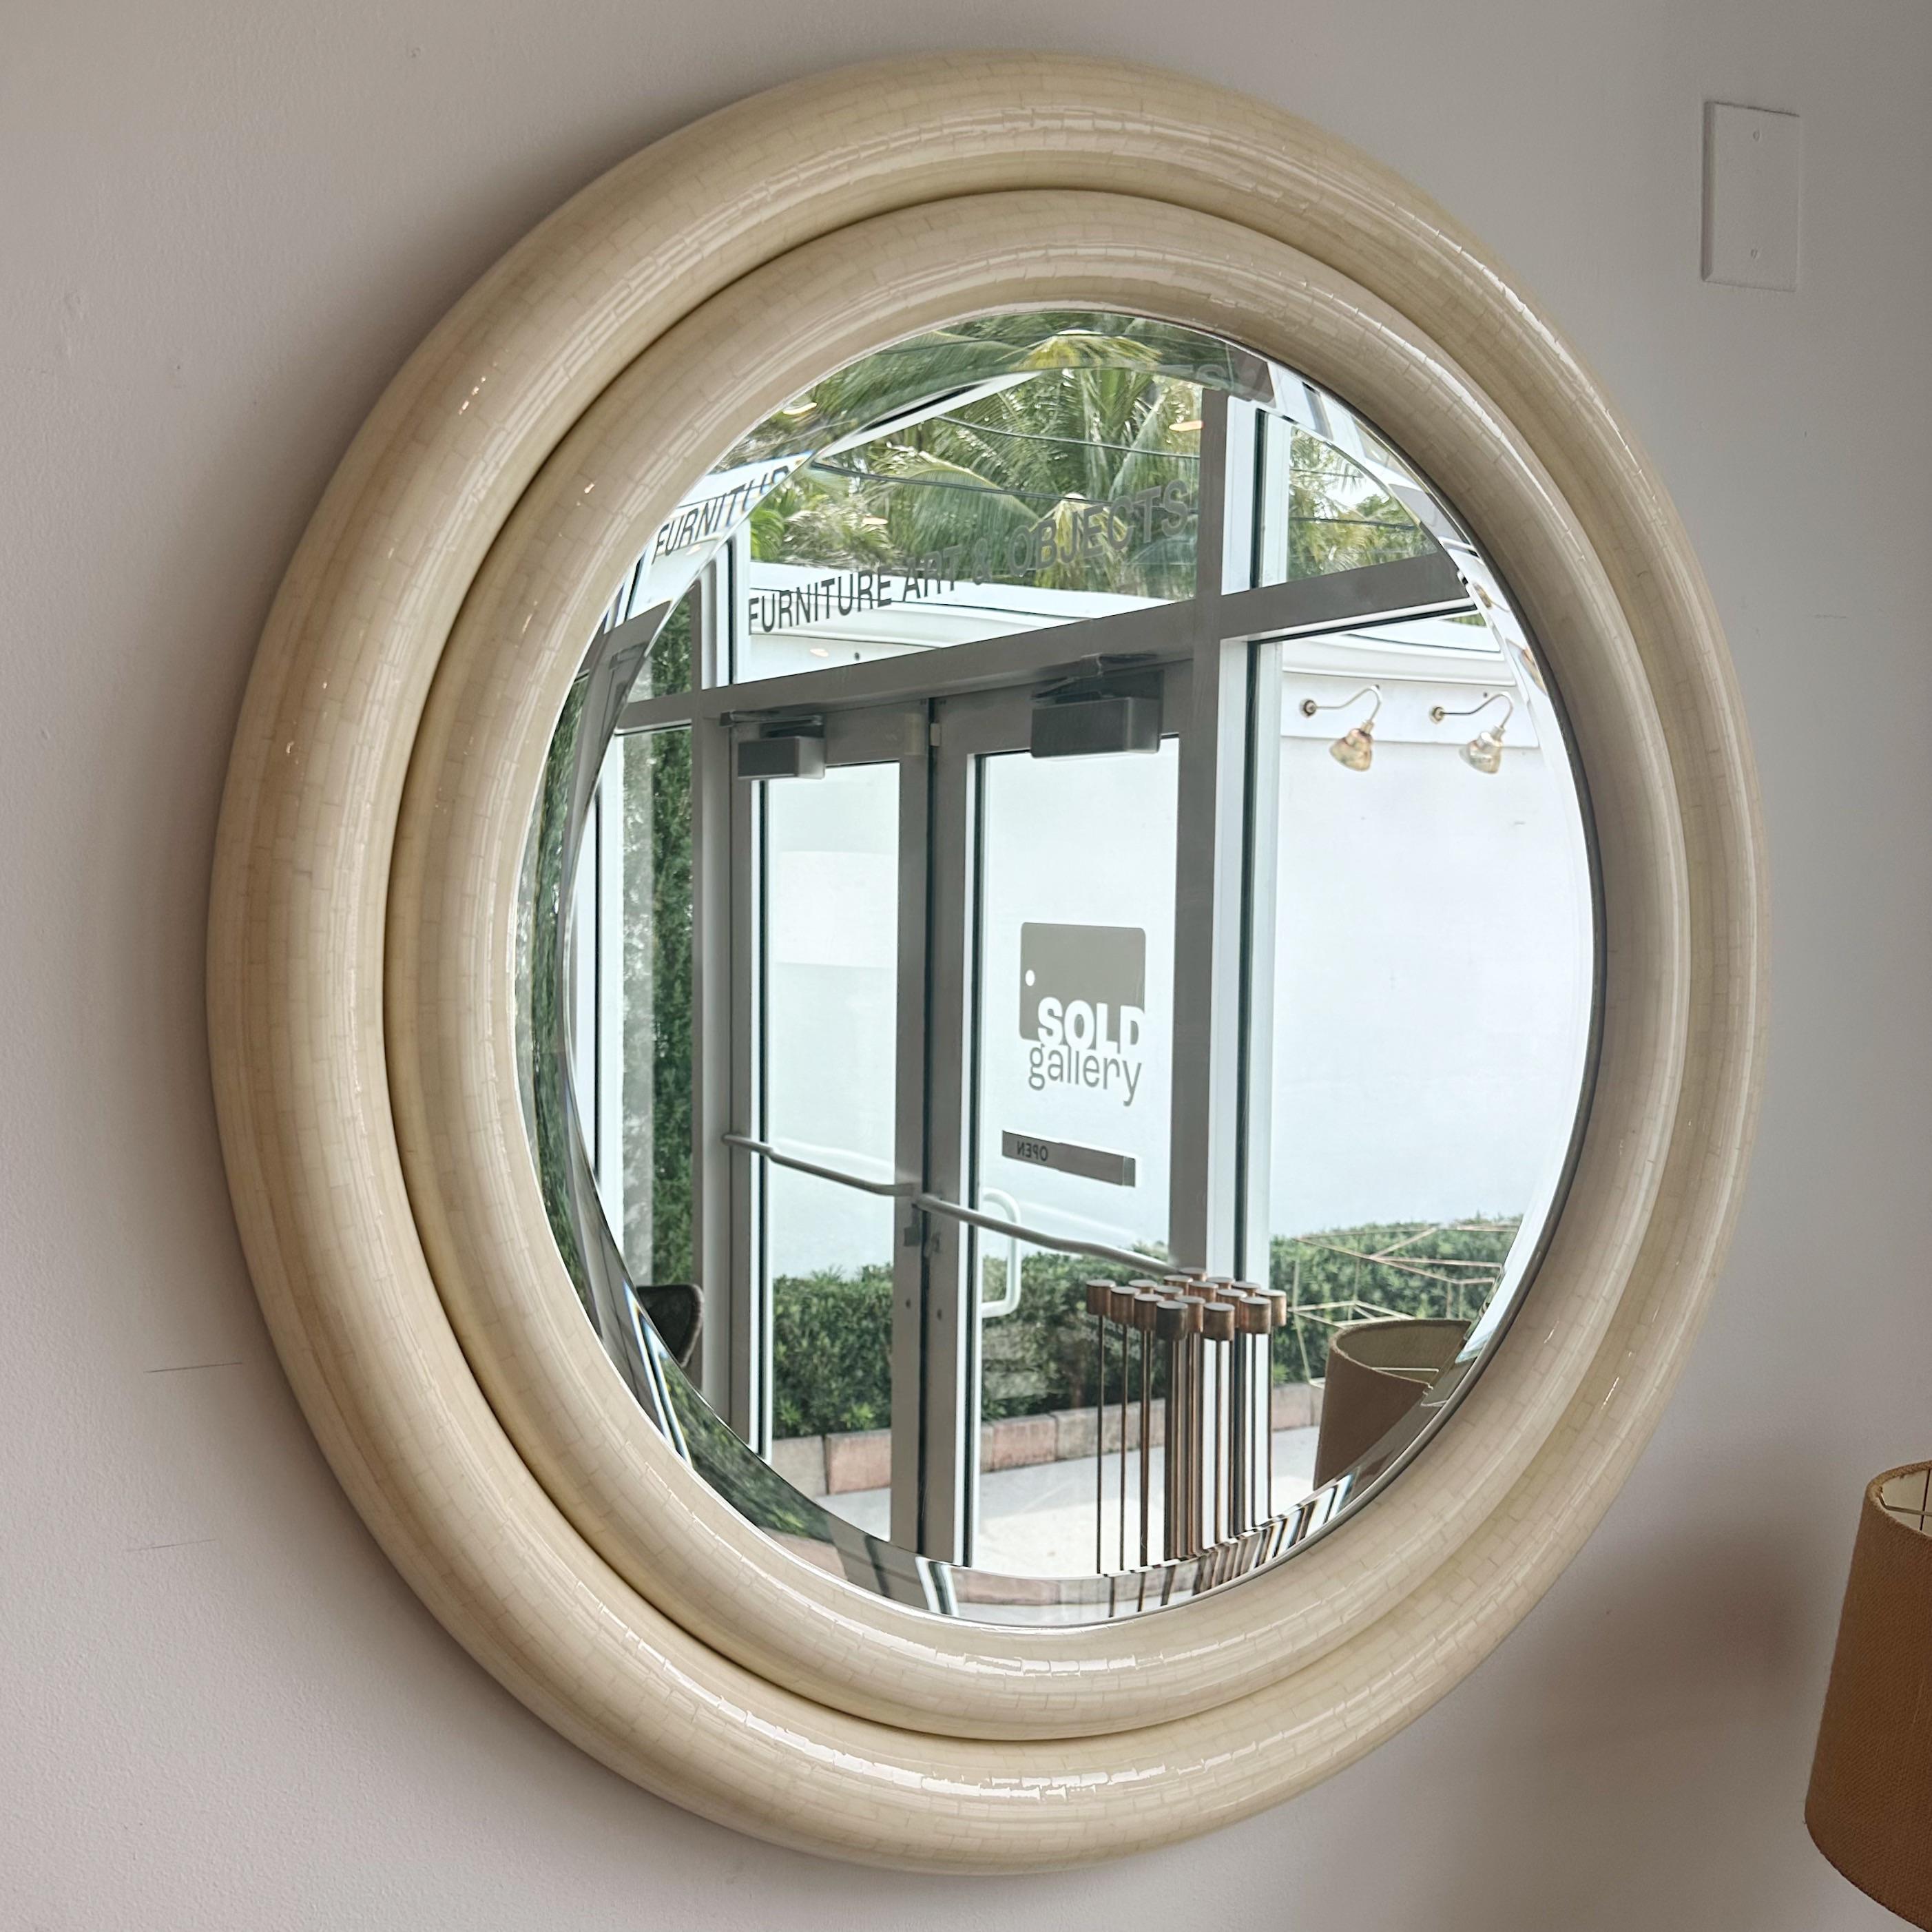 Early 1970s double bullseye wall mirror in tessellated bone with beveled edge mirror. Made in Columbia label on reverse side.